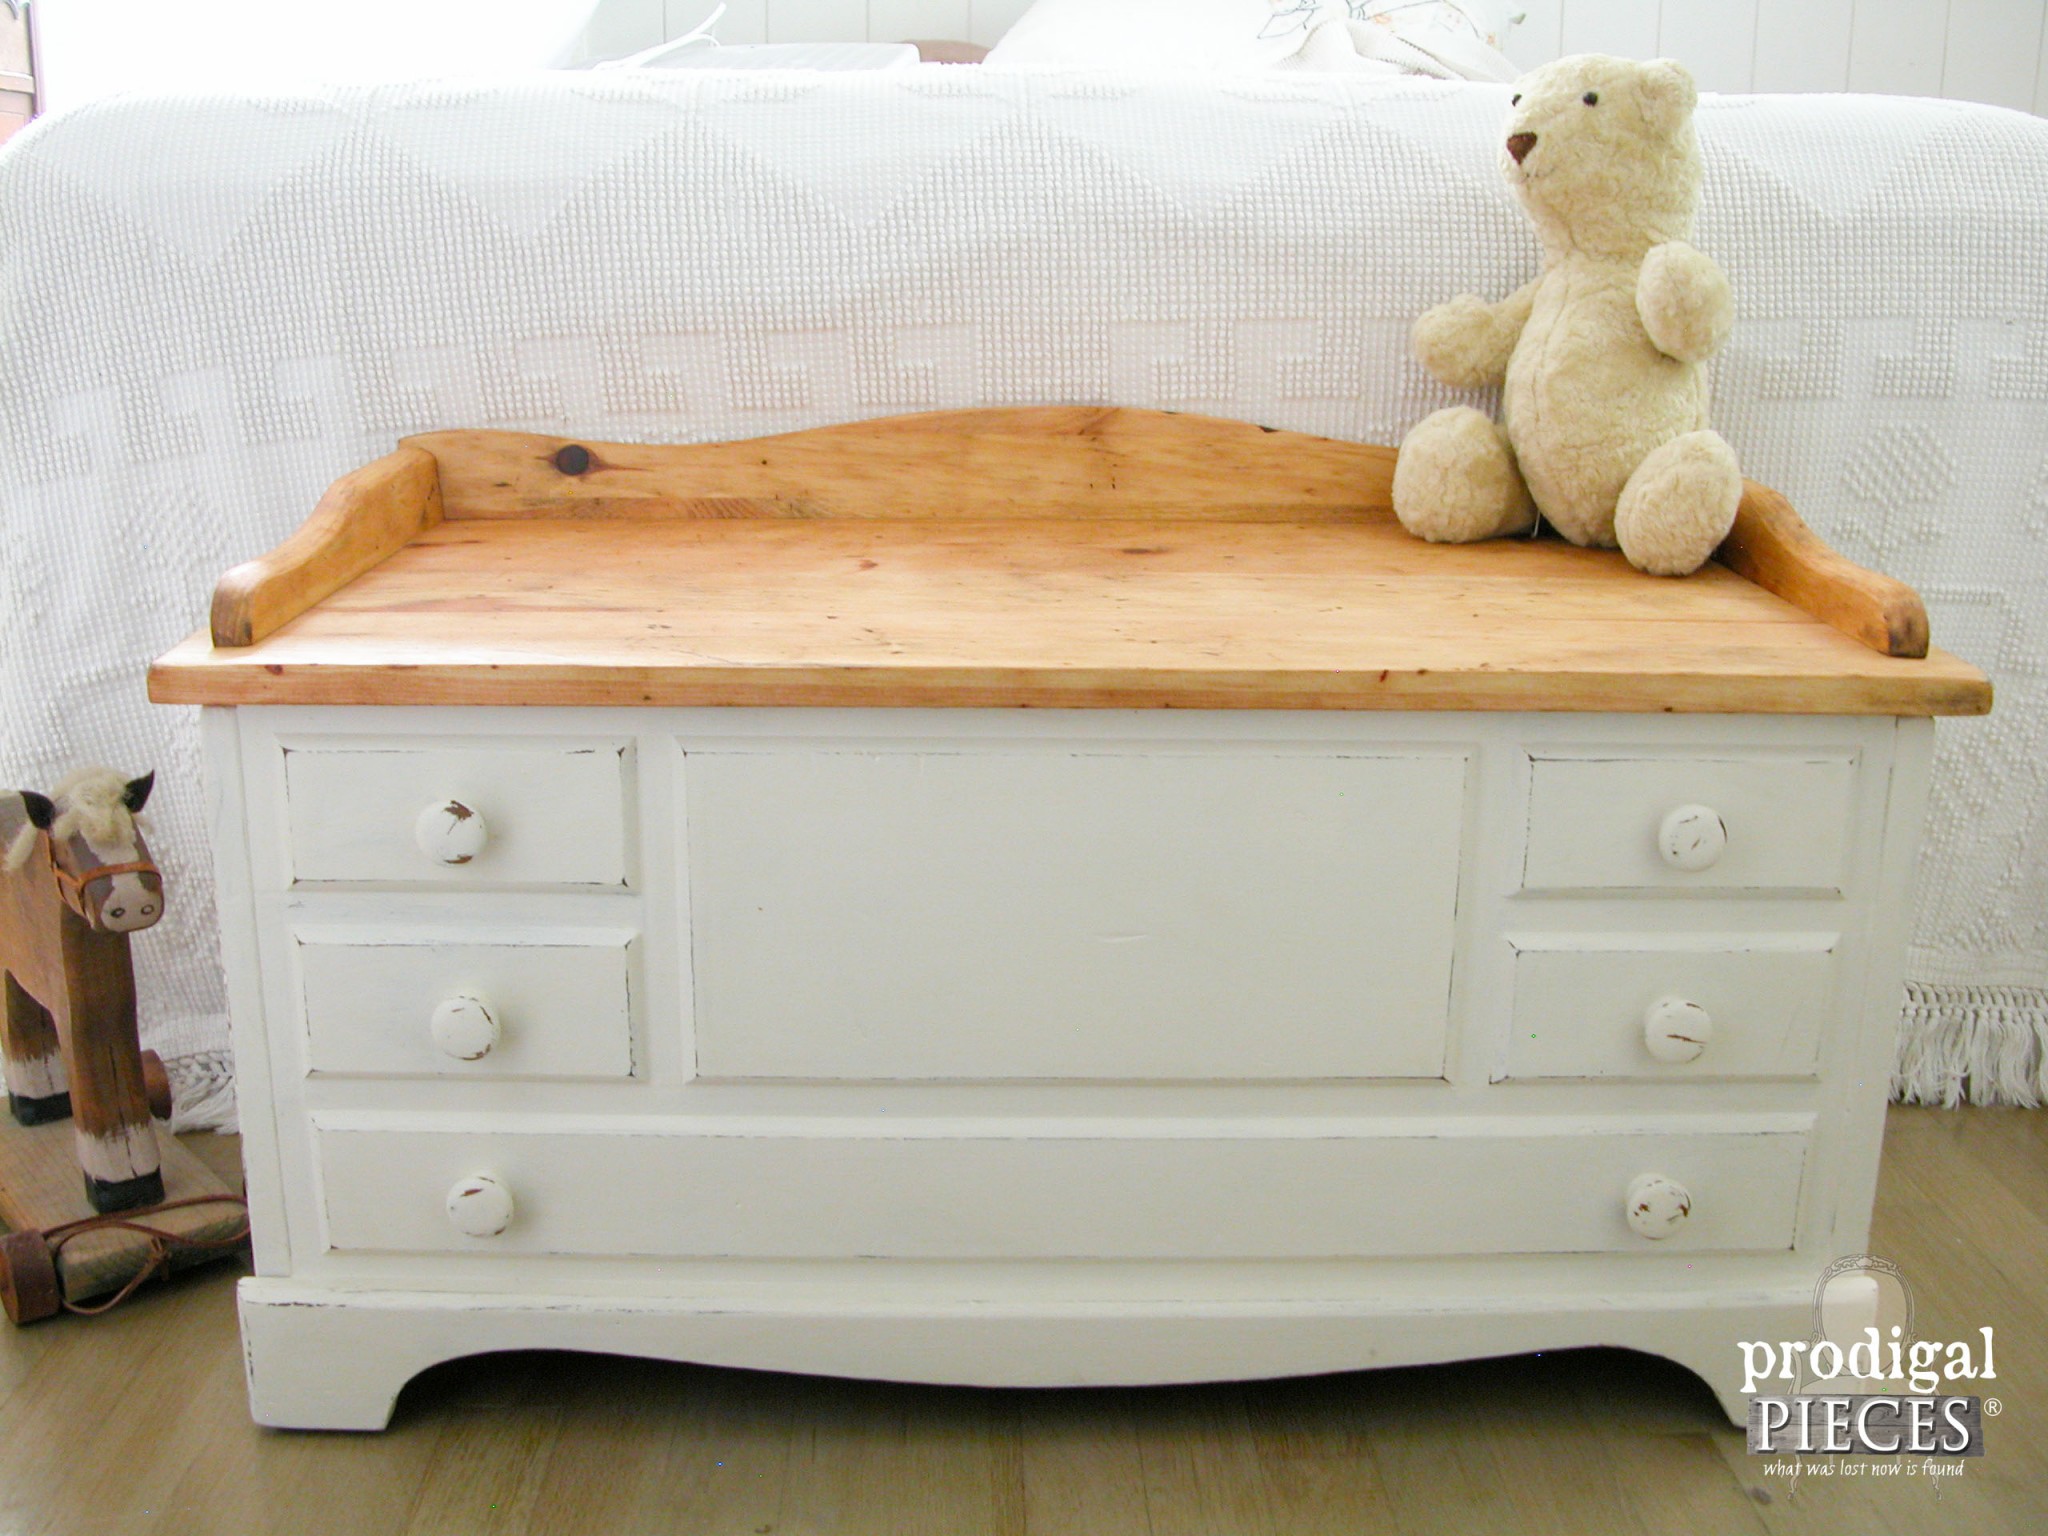 Rustic Child's DIY Wooden Chest by Prodigal Pieces | prodigalpieces.com